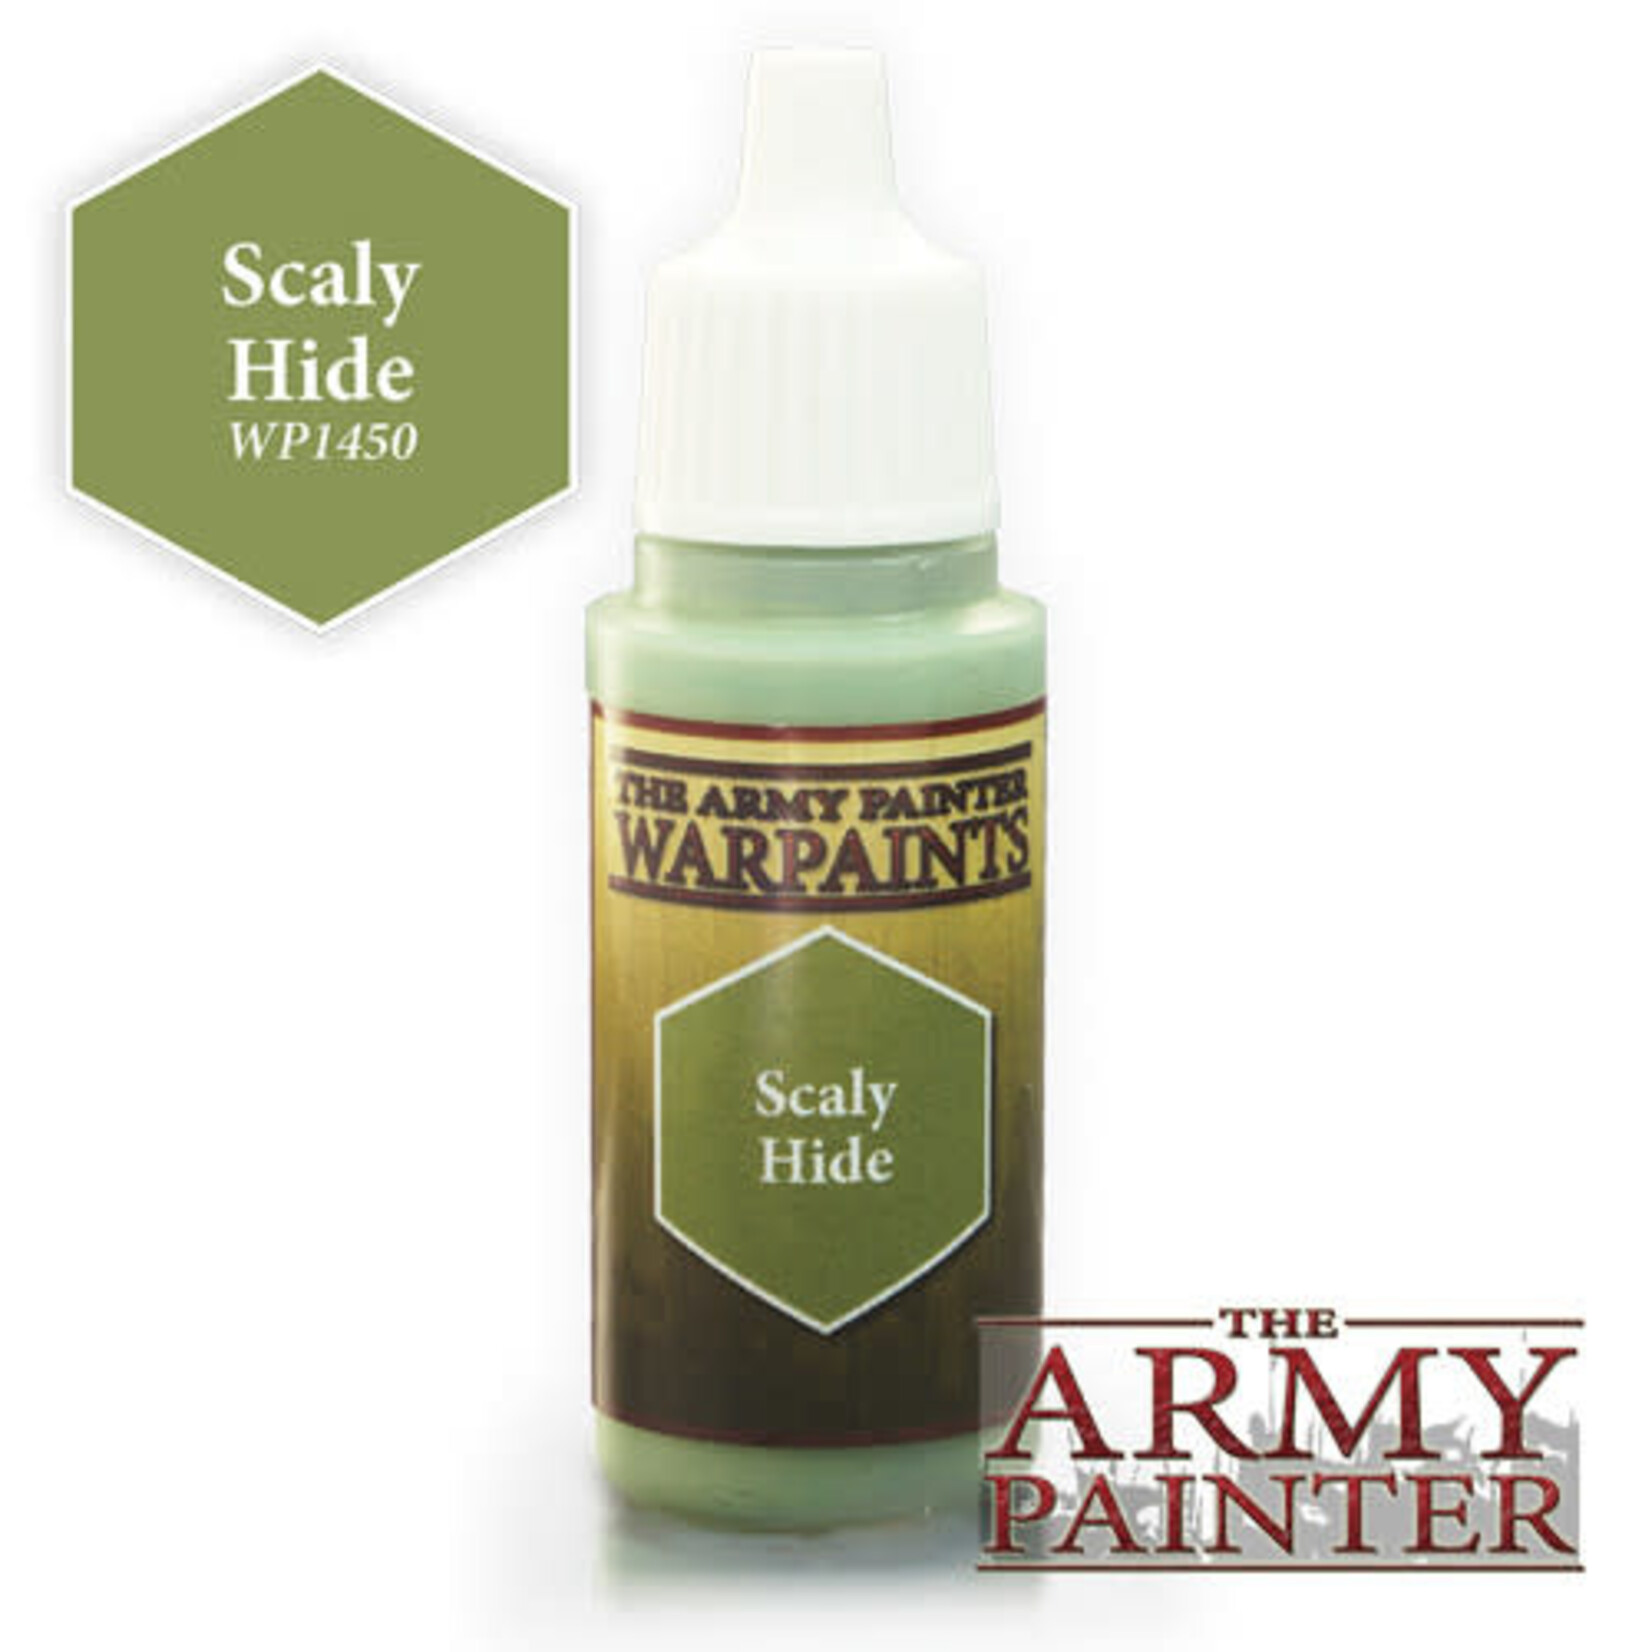 The Army Painter Warpaints: Scaly Hide 18ml